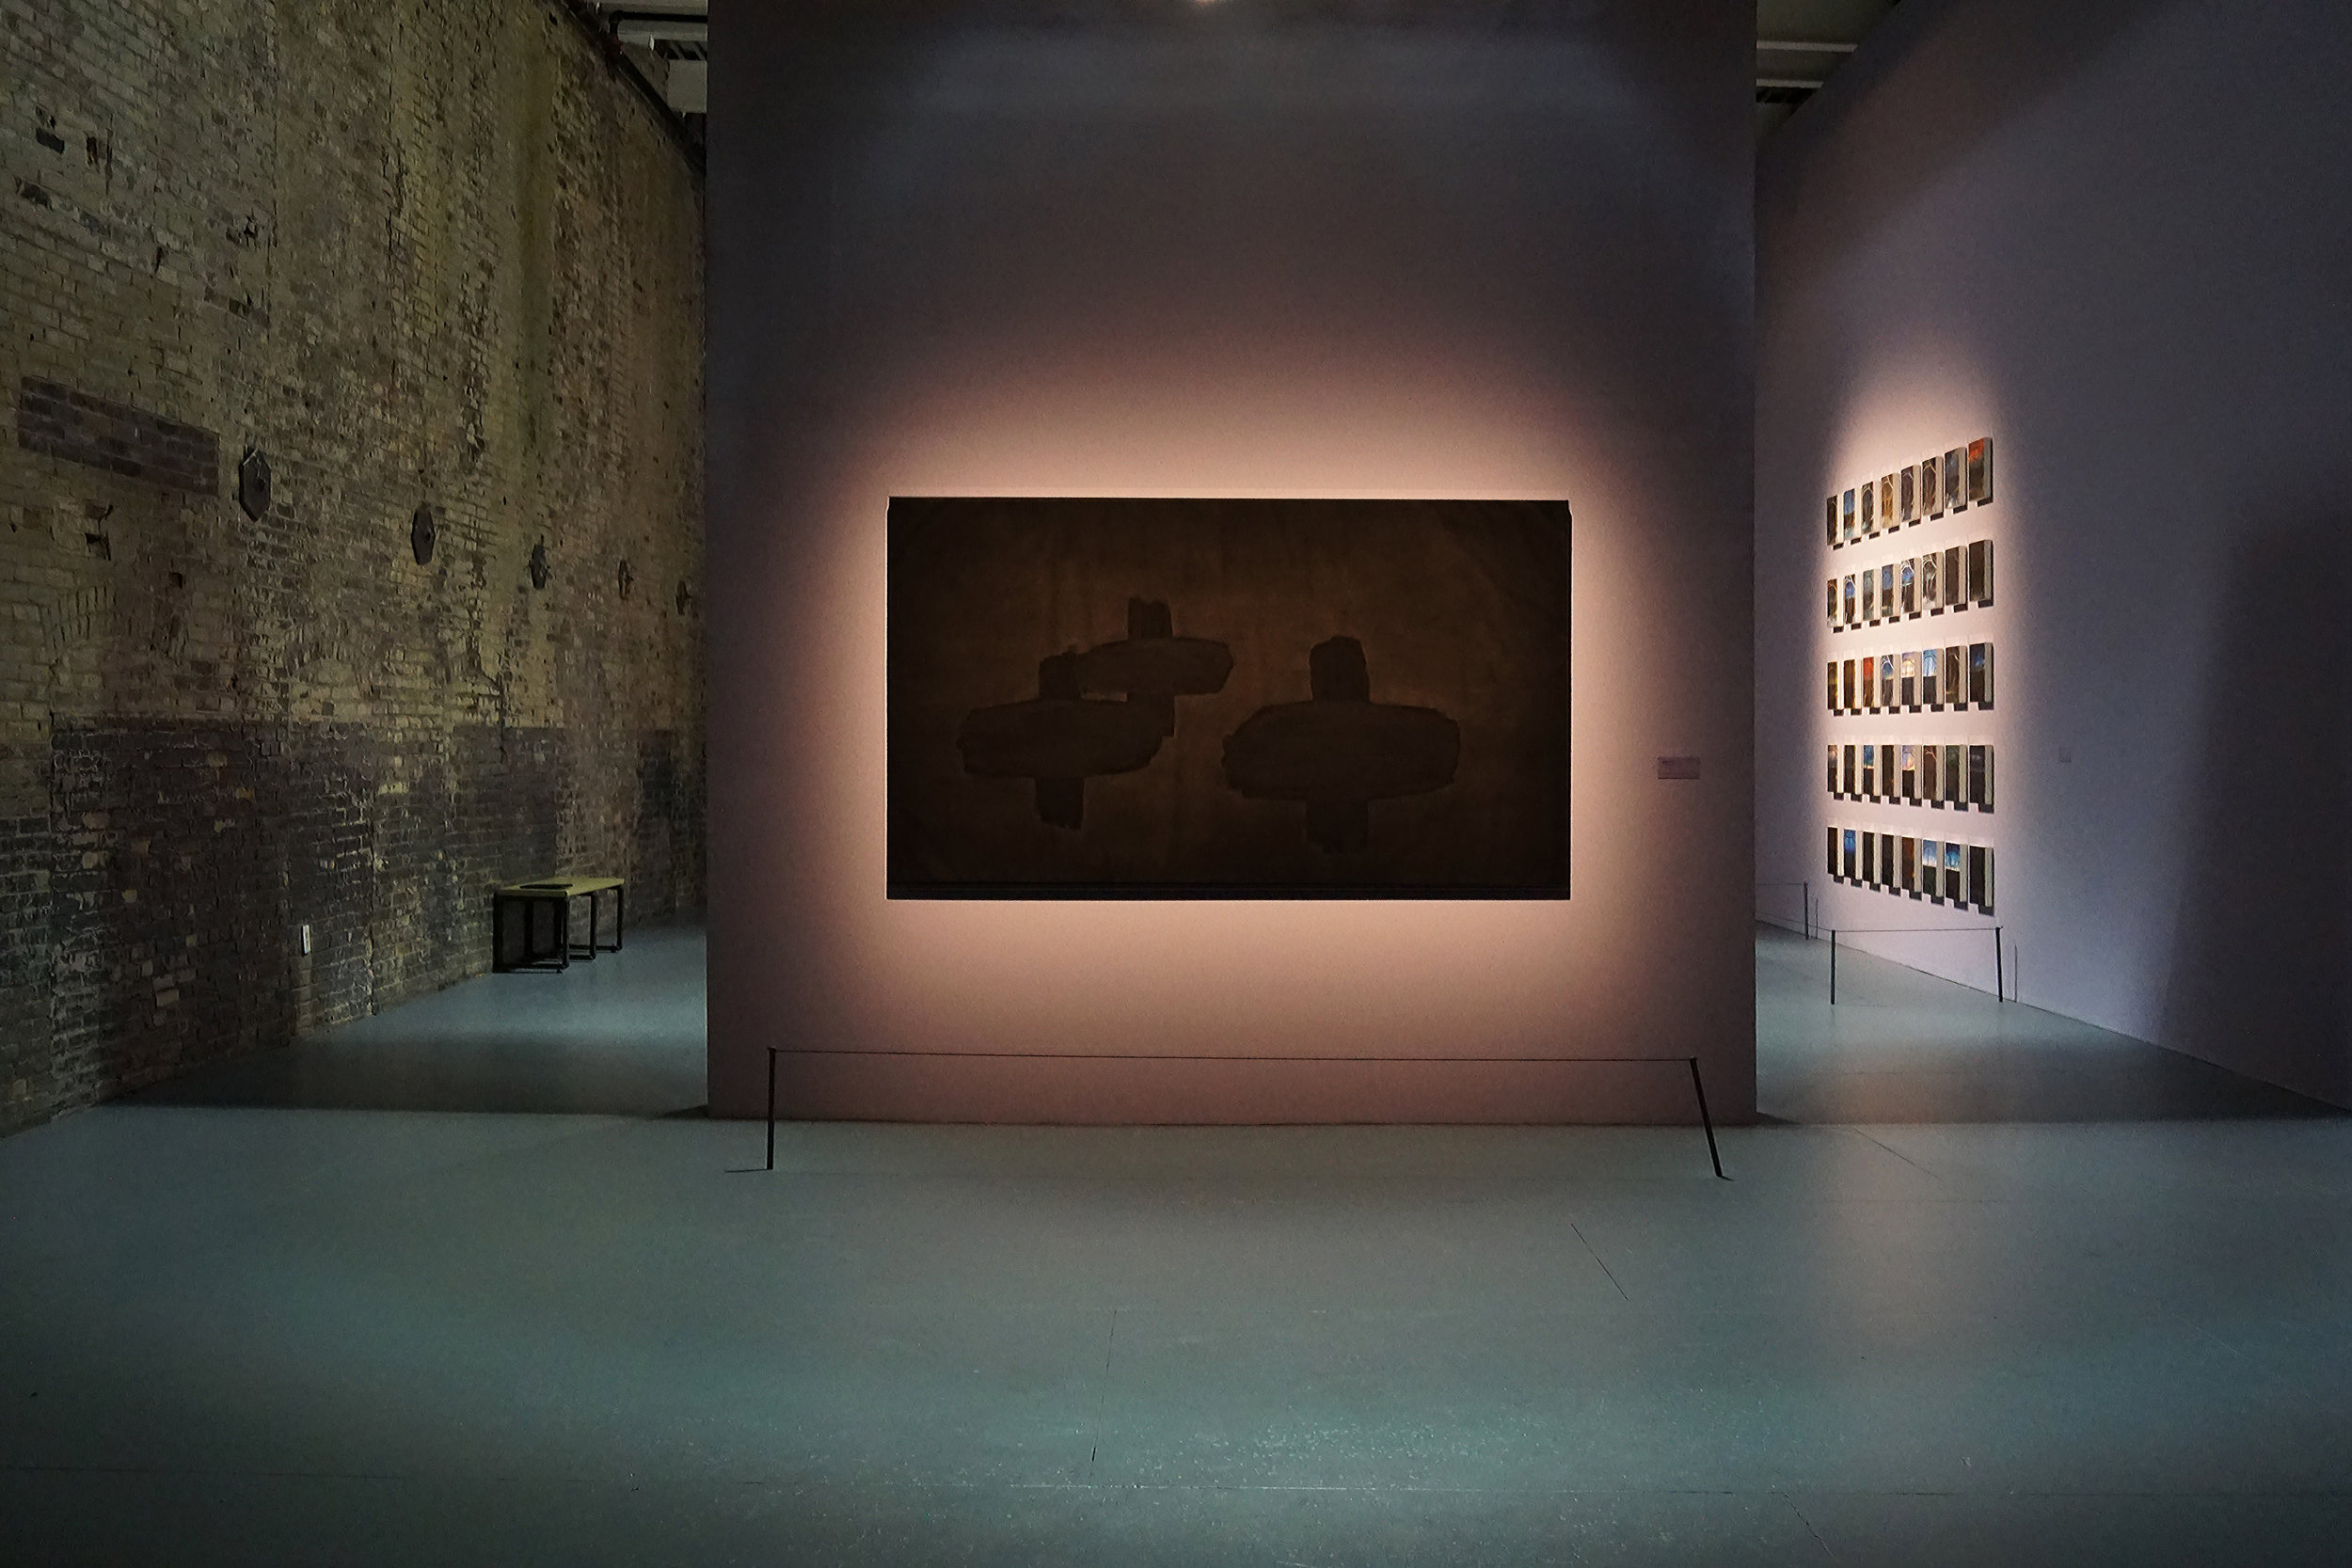   The Veils are Thin,  2019 Black gesso on canvas 93 x 53 inches (2.36m x 1.34m)  Installation view in  The Lure of the Dark: Contemporary Painters Conjure the Night at Mass MoCA  